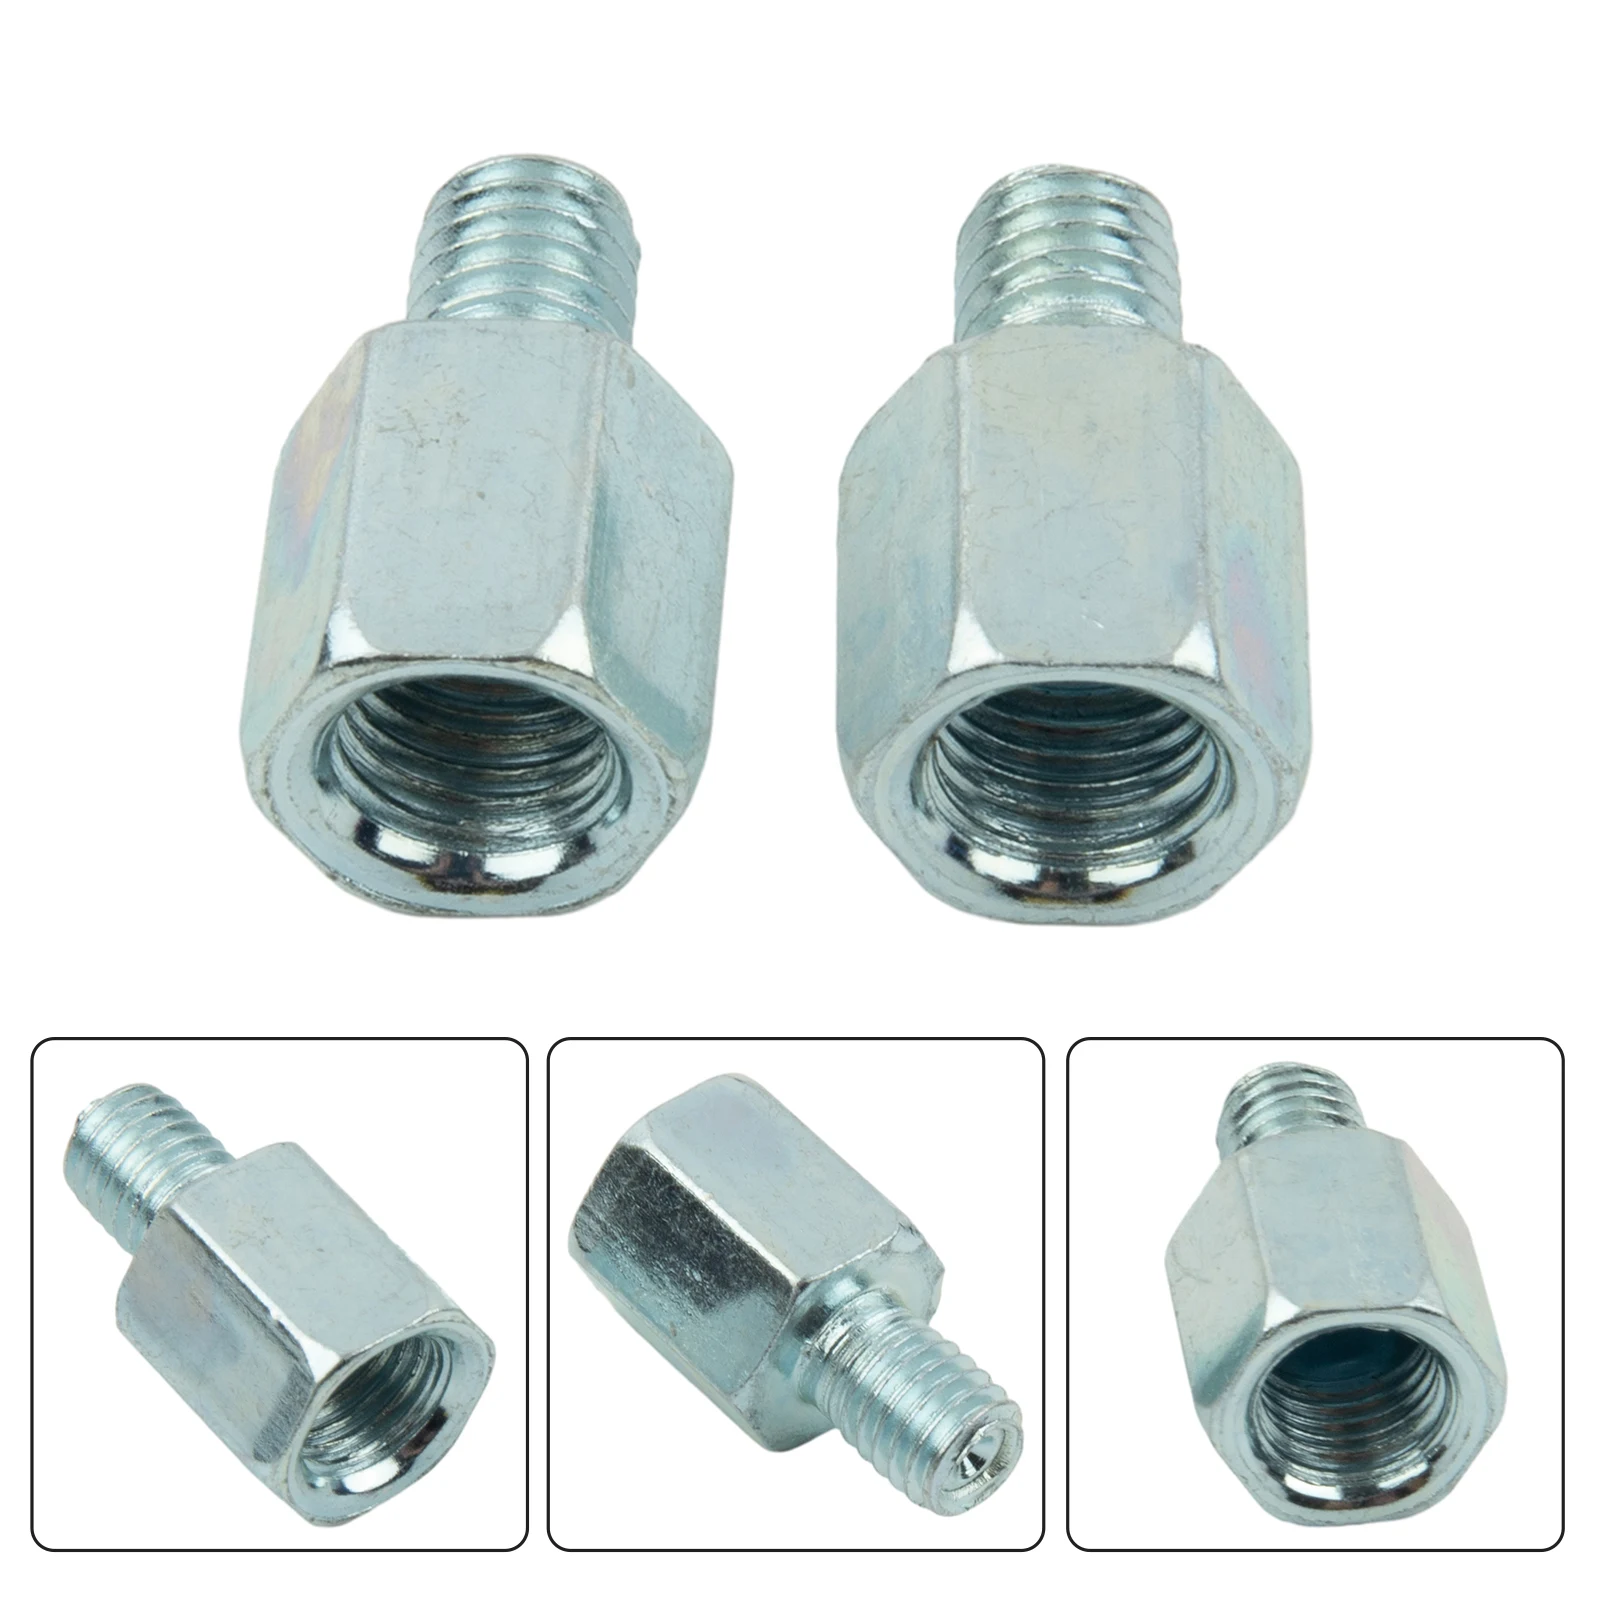 10mm To 8mm Mirror Adapter Accessories Clockwise Female To Male Motorcycle Scooter Threaded High Quality Durable